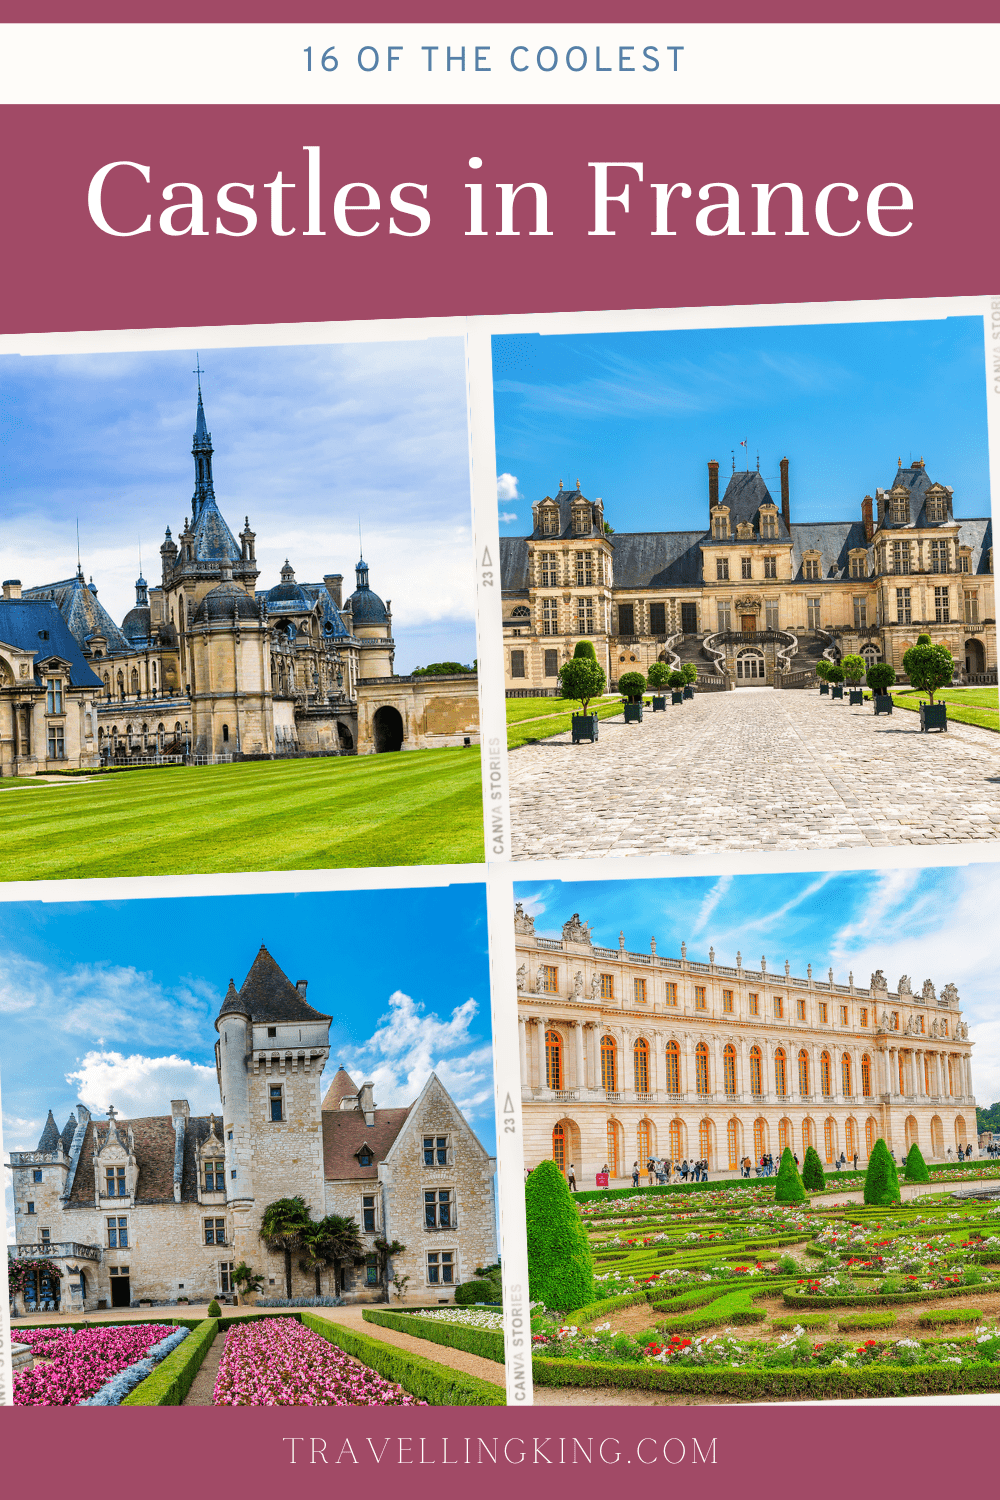 16 of the Coolest Castles in France